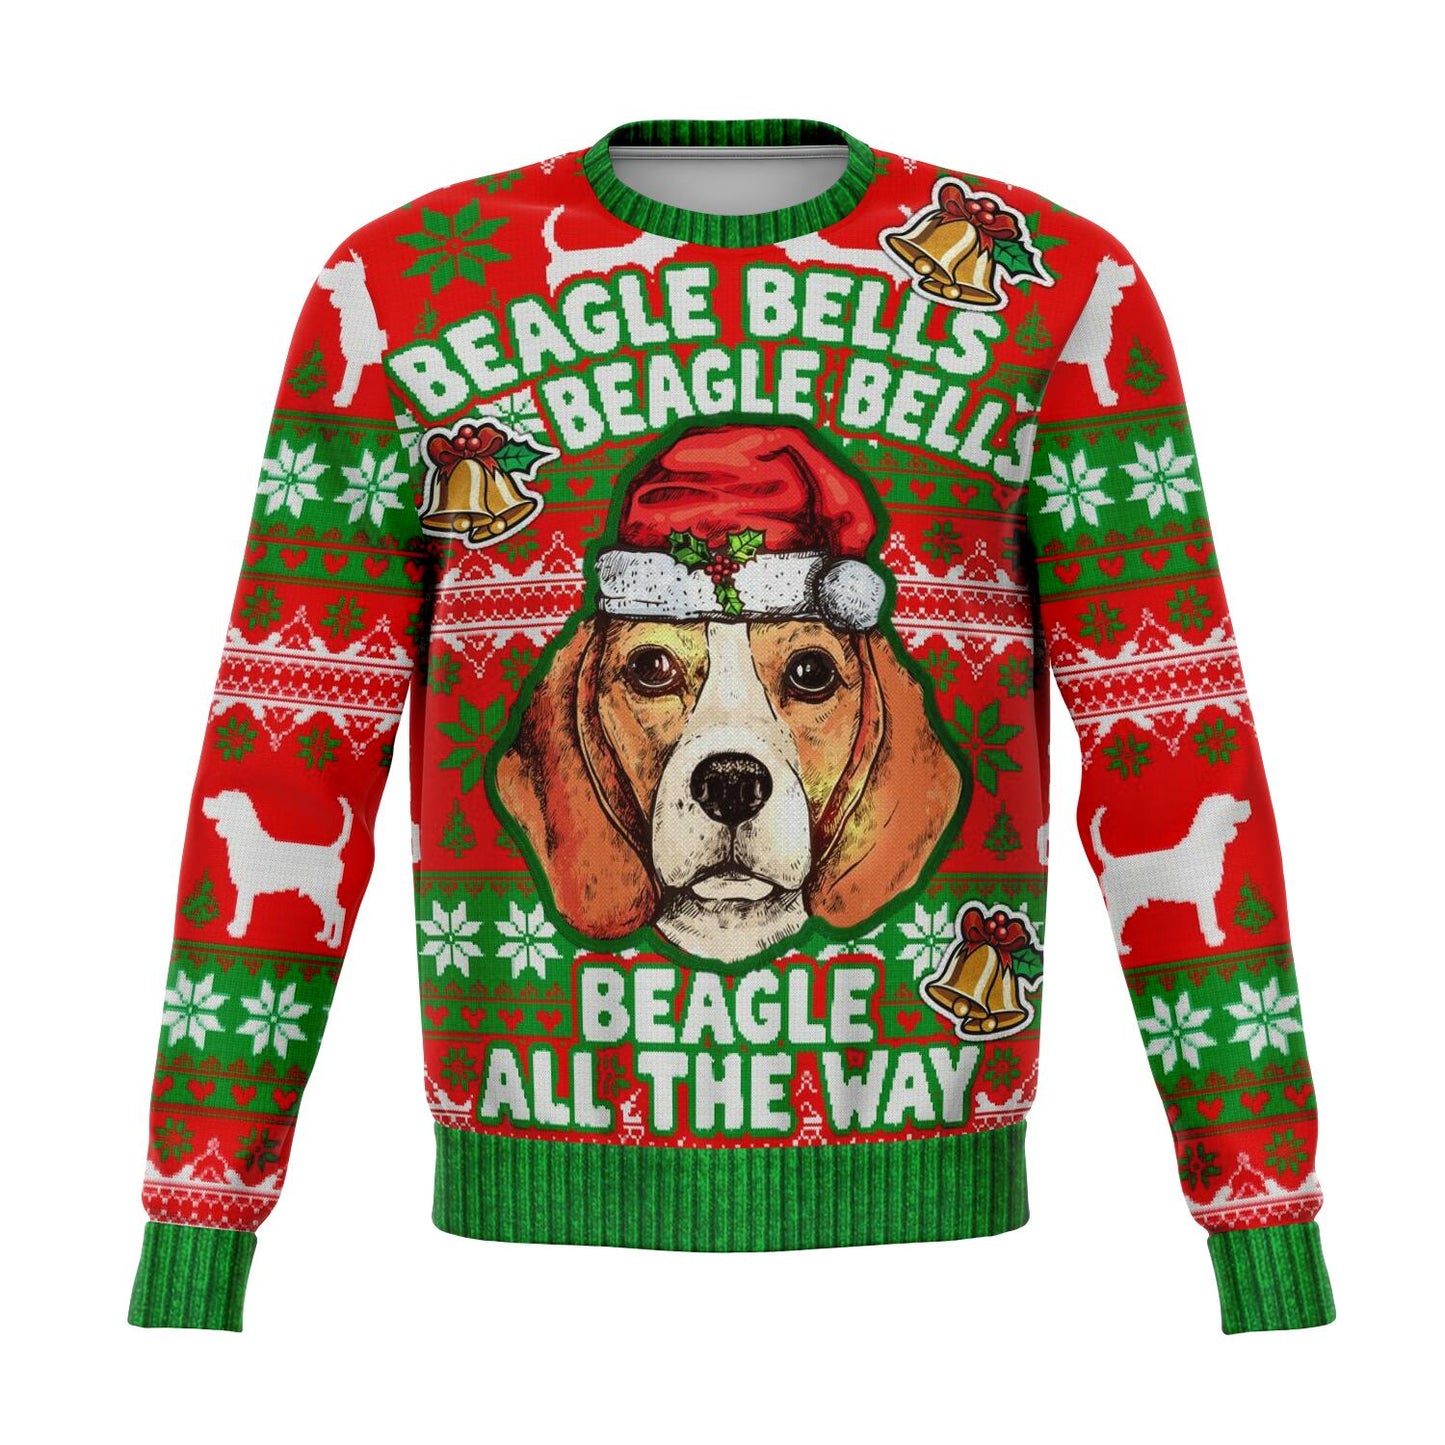 Beagle Ugly Christmas Sweater, Dog Beagle Bells All the Way Funny Print Party Sweatshirt Holiday Men Women Christmas Gift Plus Size Starcove Fashion